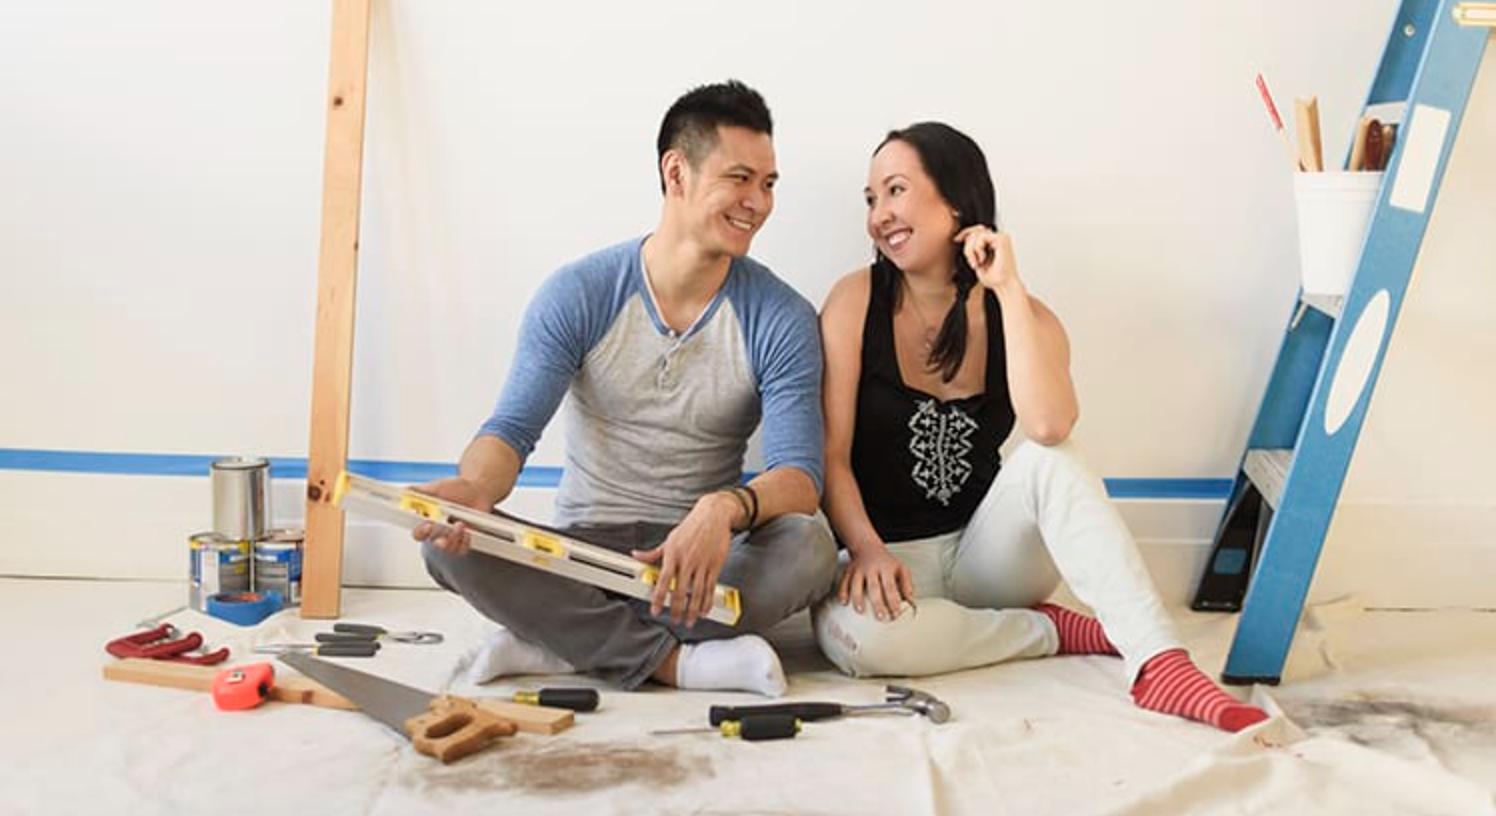 The best use of time and money when it comes to renovations